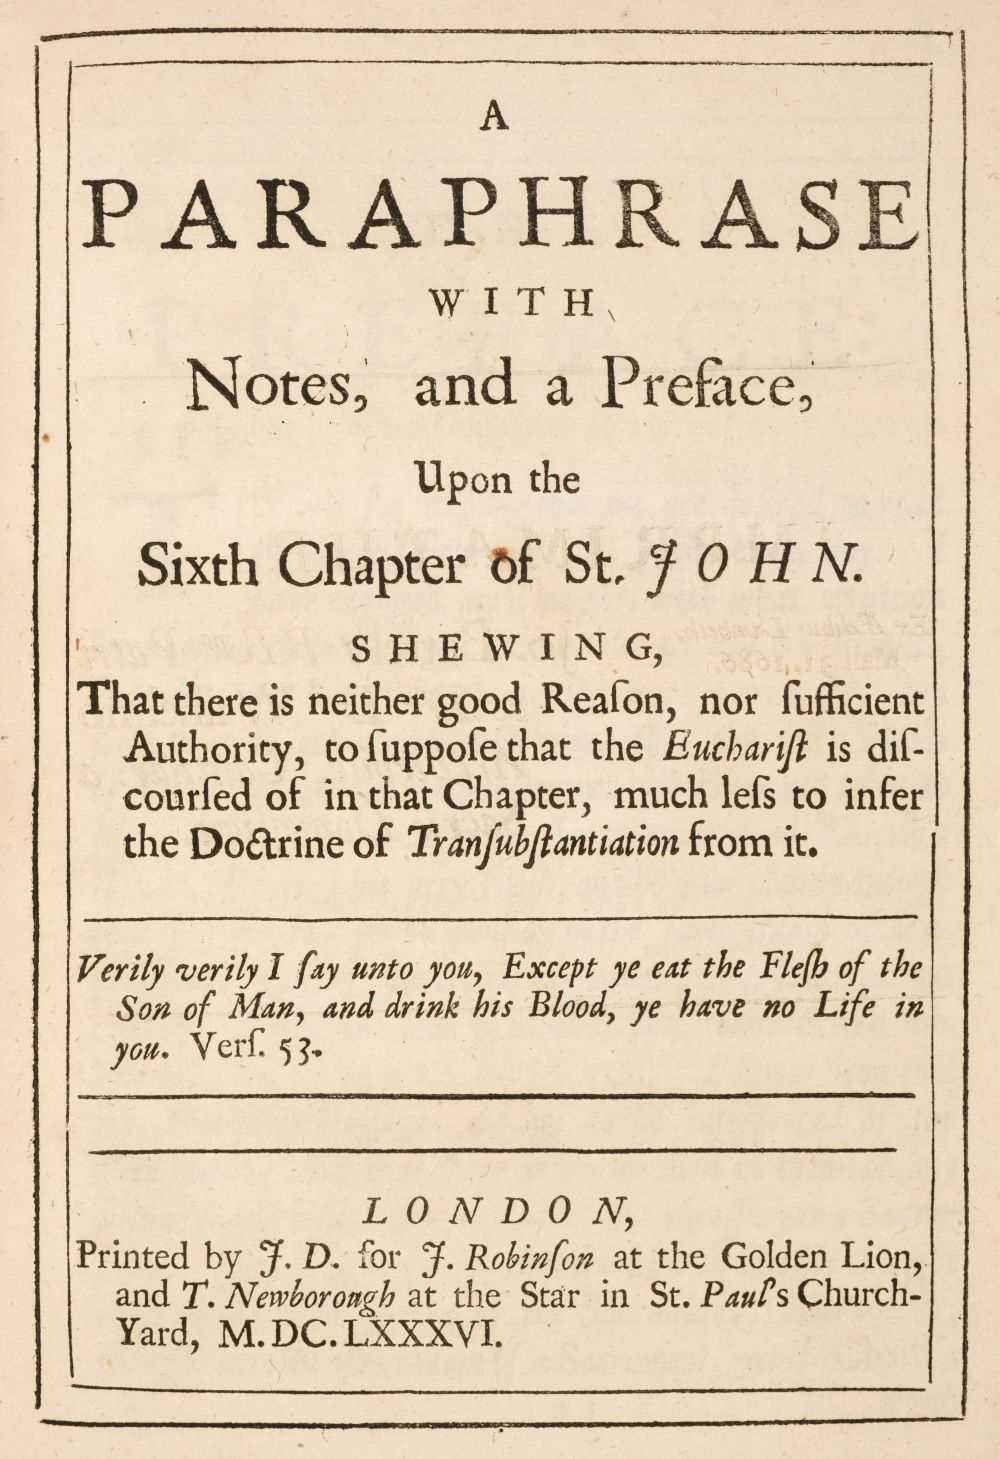 Lot 208 - Clagett (William). A paraphrase with notes, and a preface, upon the sixth chapter of St. John., 1686